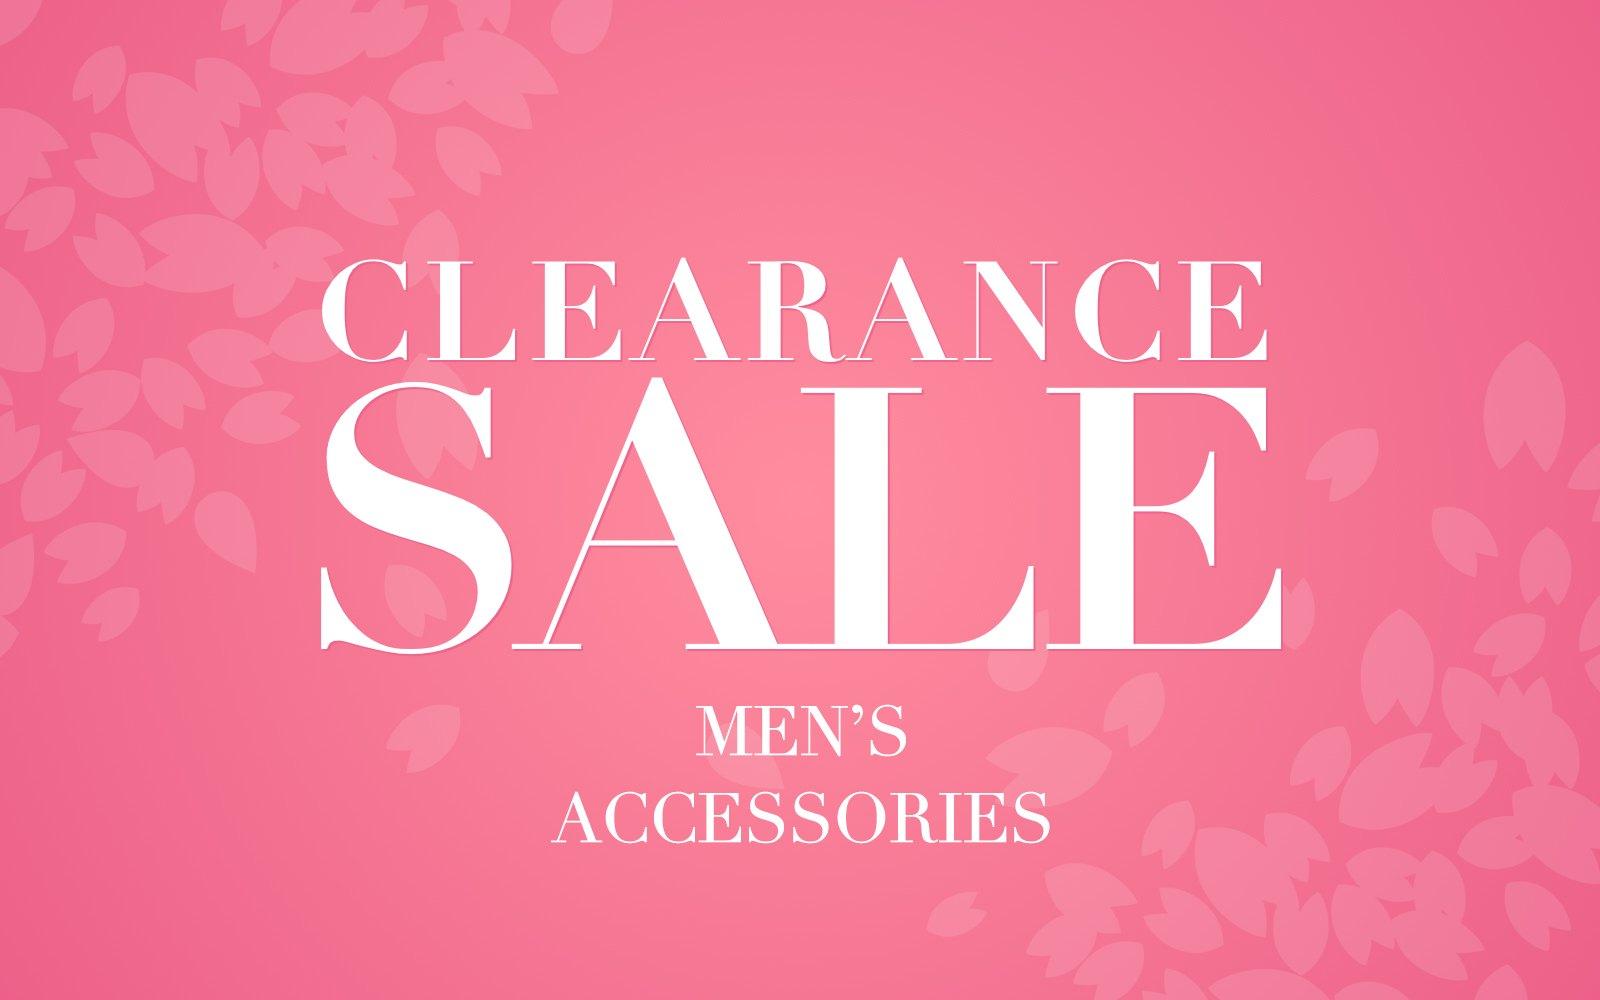 Clearance Men's Accessories